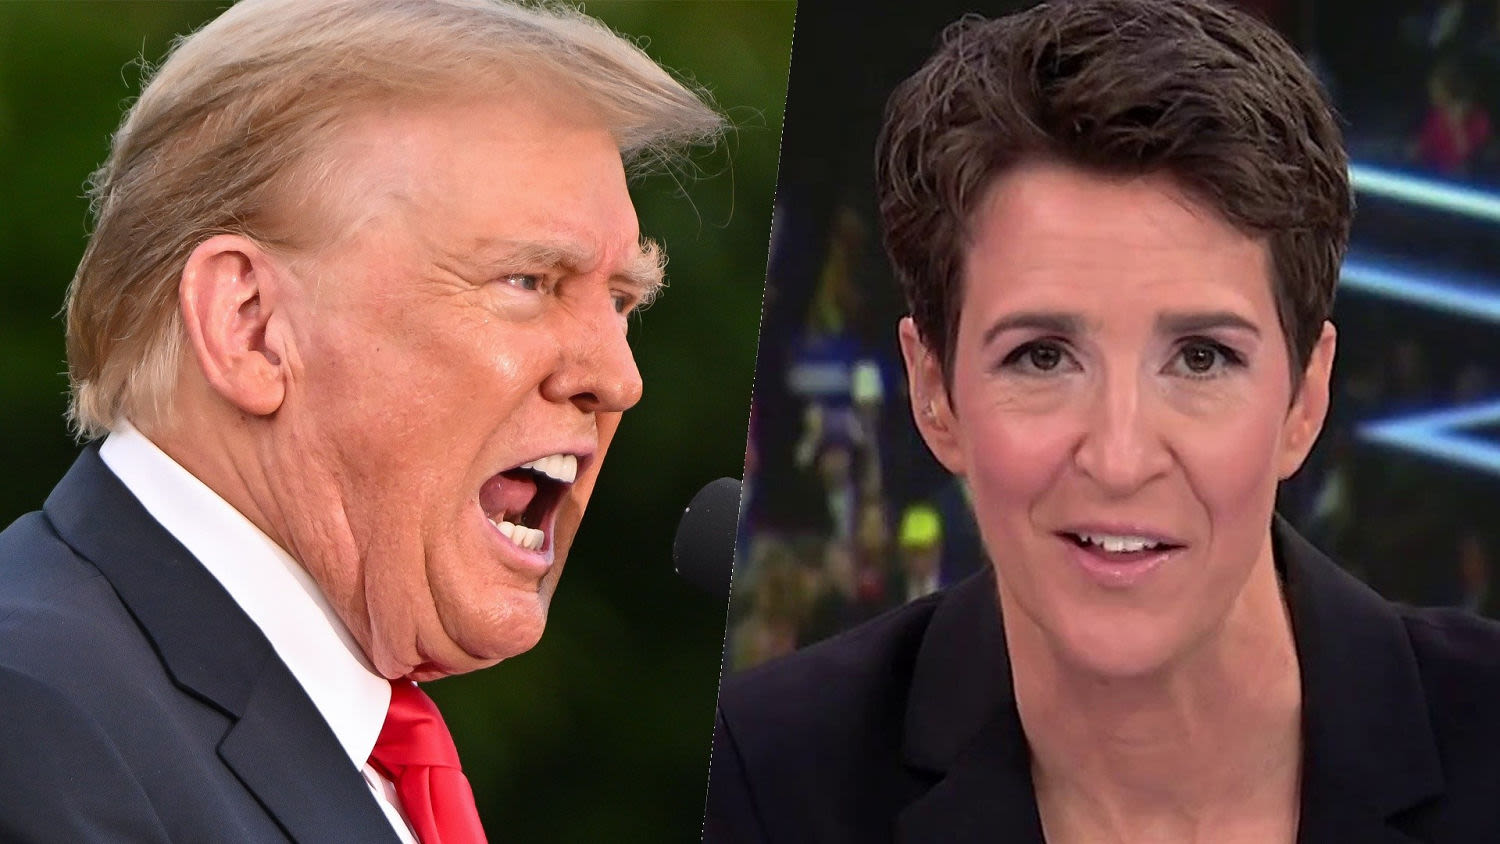 Maddow: Trump's record of disgrace makes for awkward Republican convention